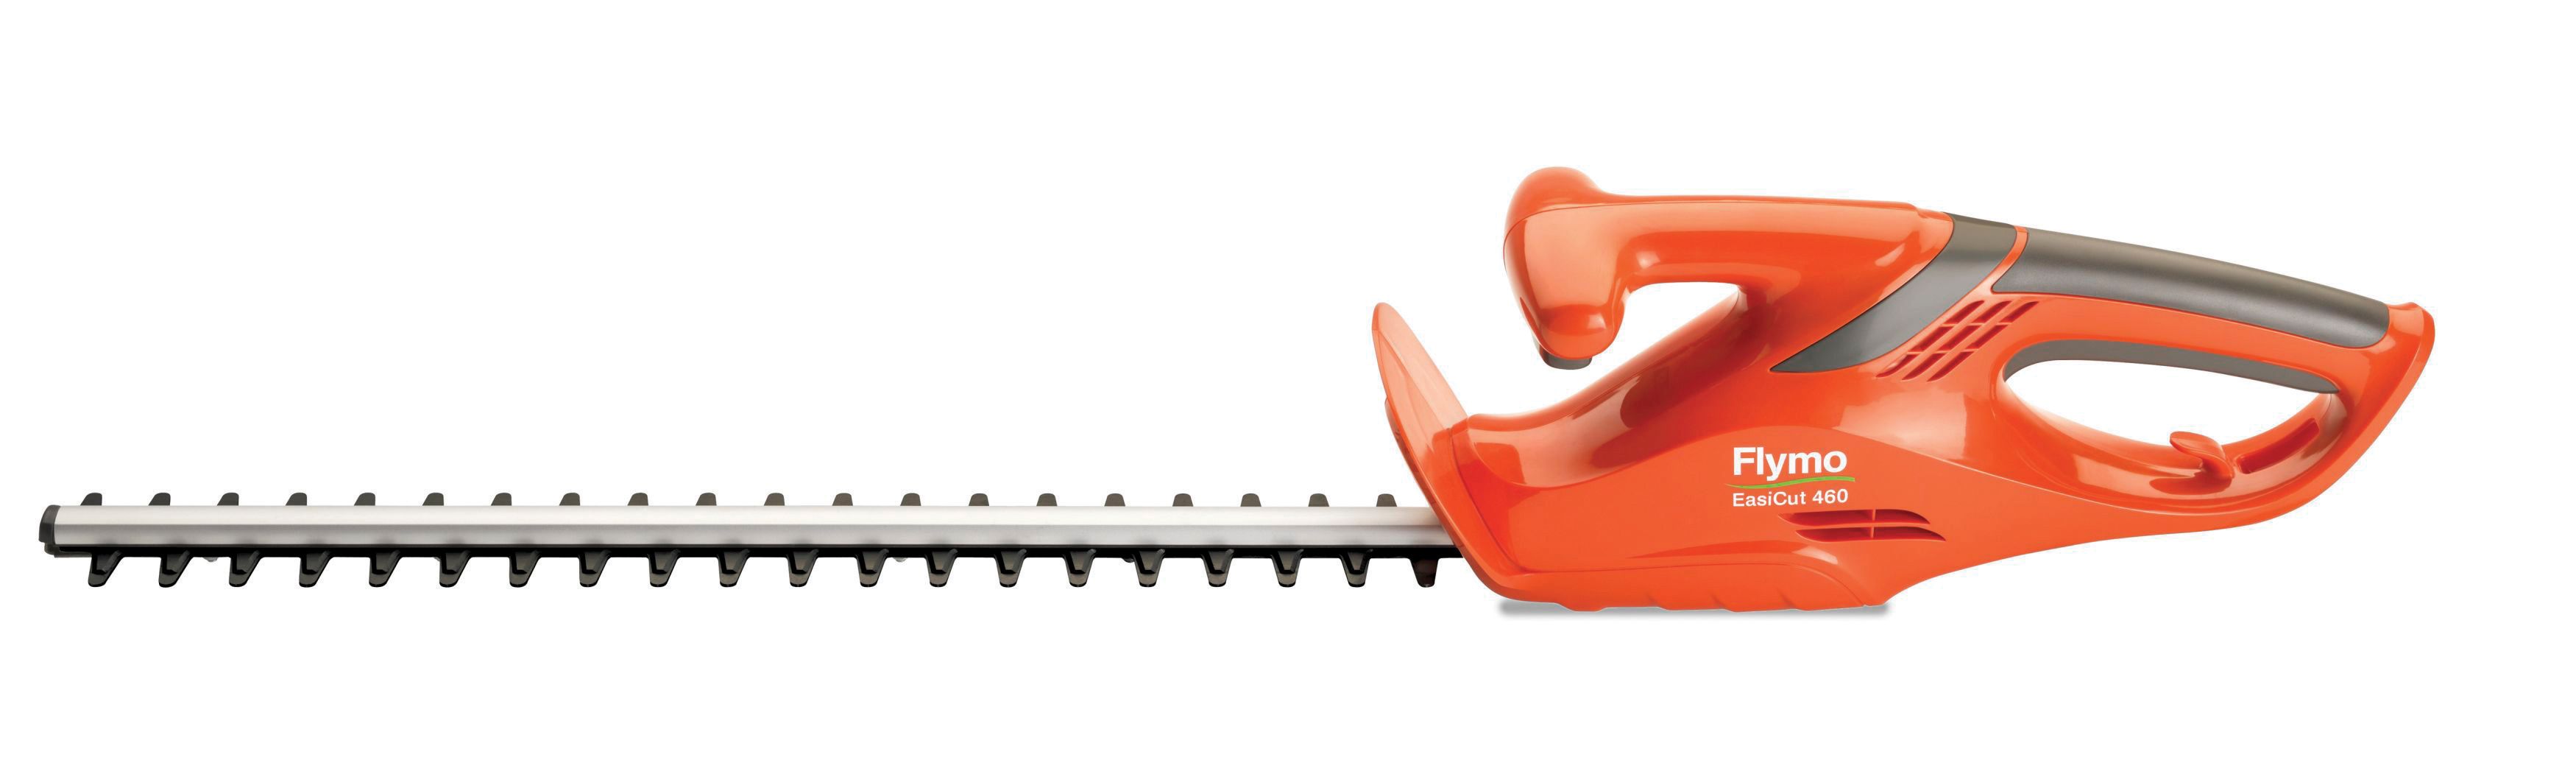 Image of Flymo Easicut 460 Electric Hedge Trimmer